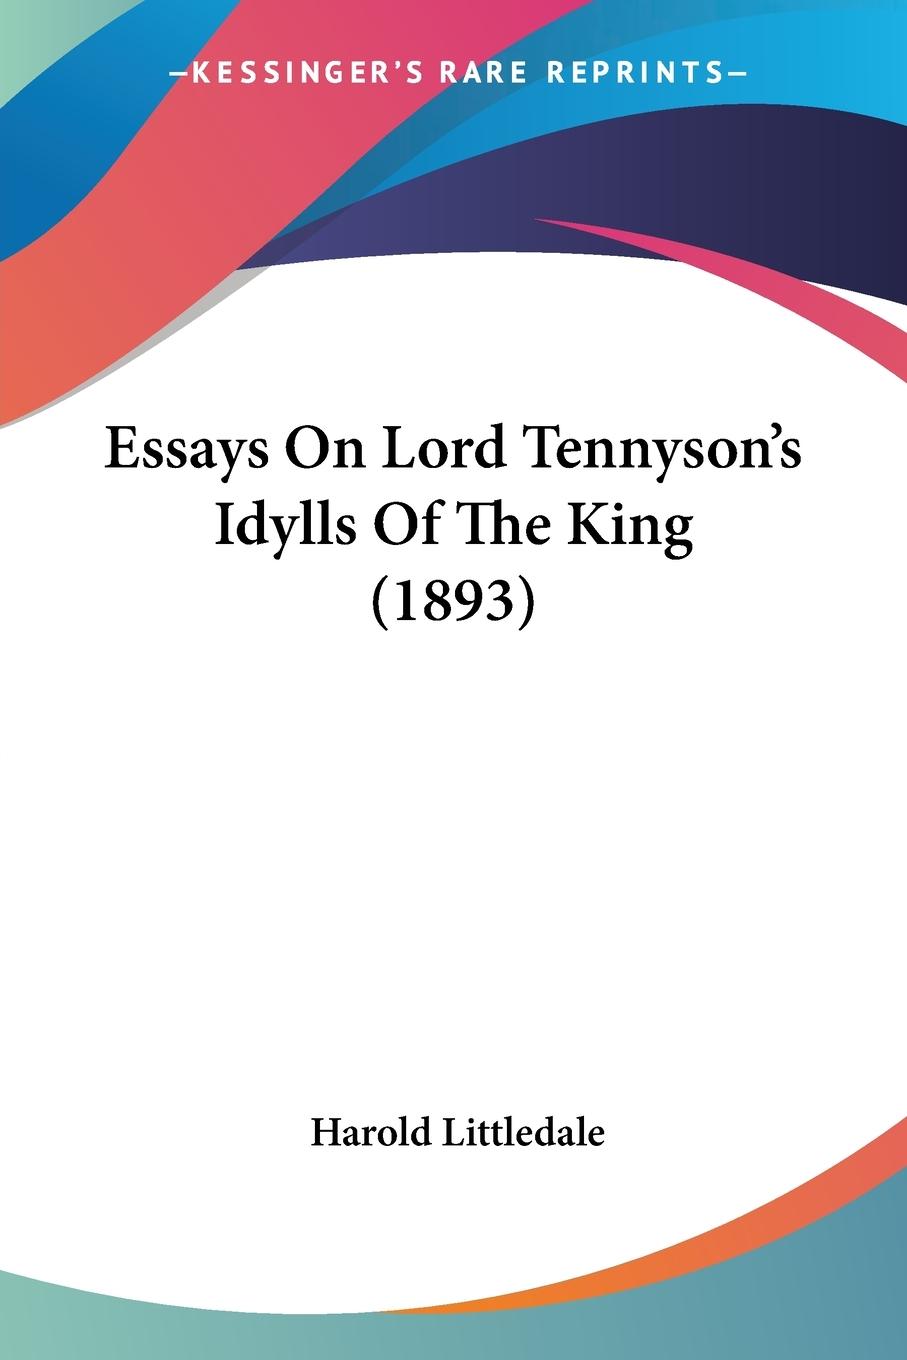 Essays On Lord Tennyson's Idylls Of The King (1893)